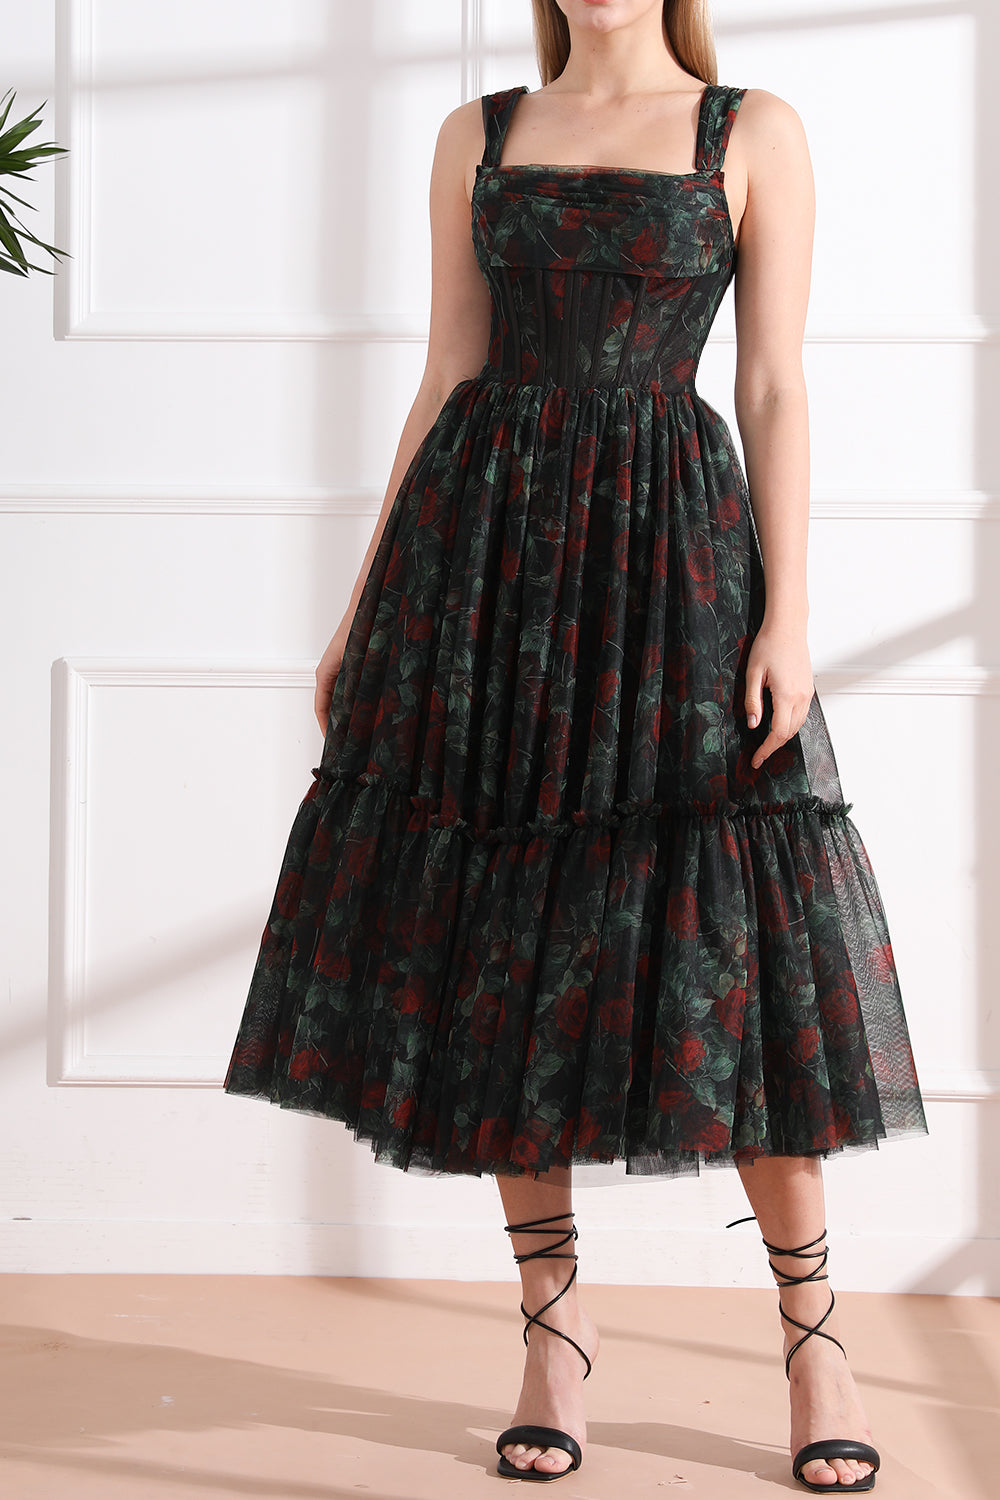 Corset Tulle Black Rose Floral Print Dress with Removable Straps